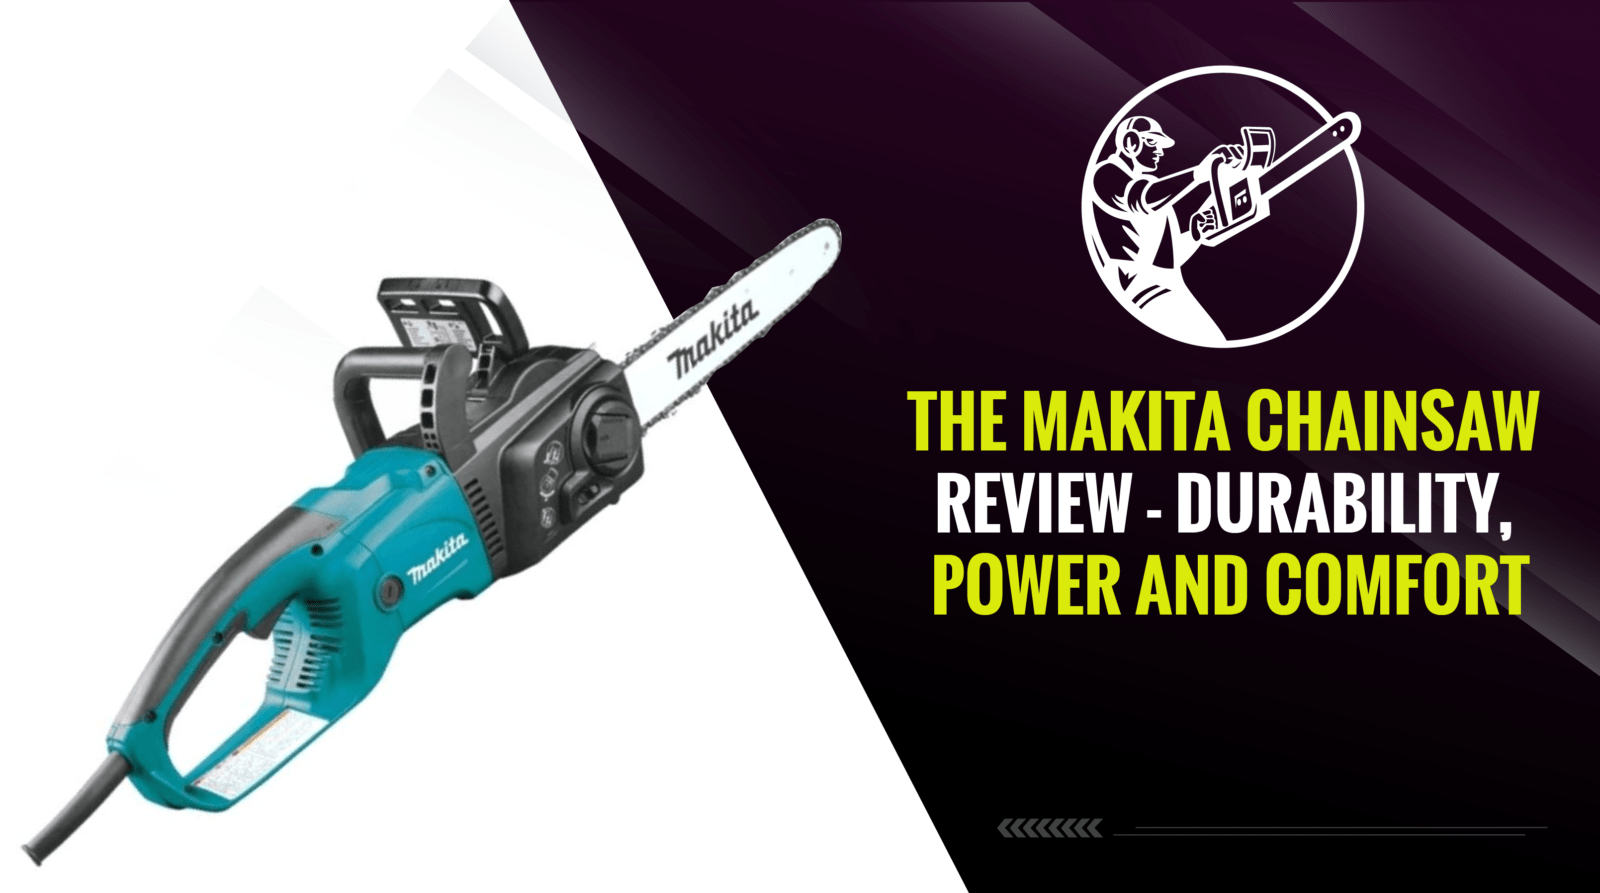 The Makita Chainsaw Review - Durability, Power and Comfort